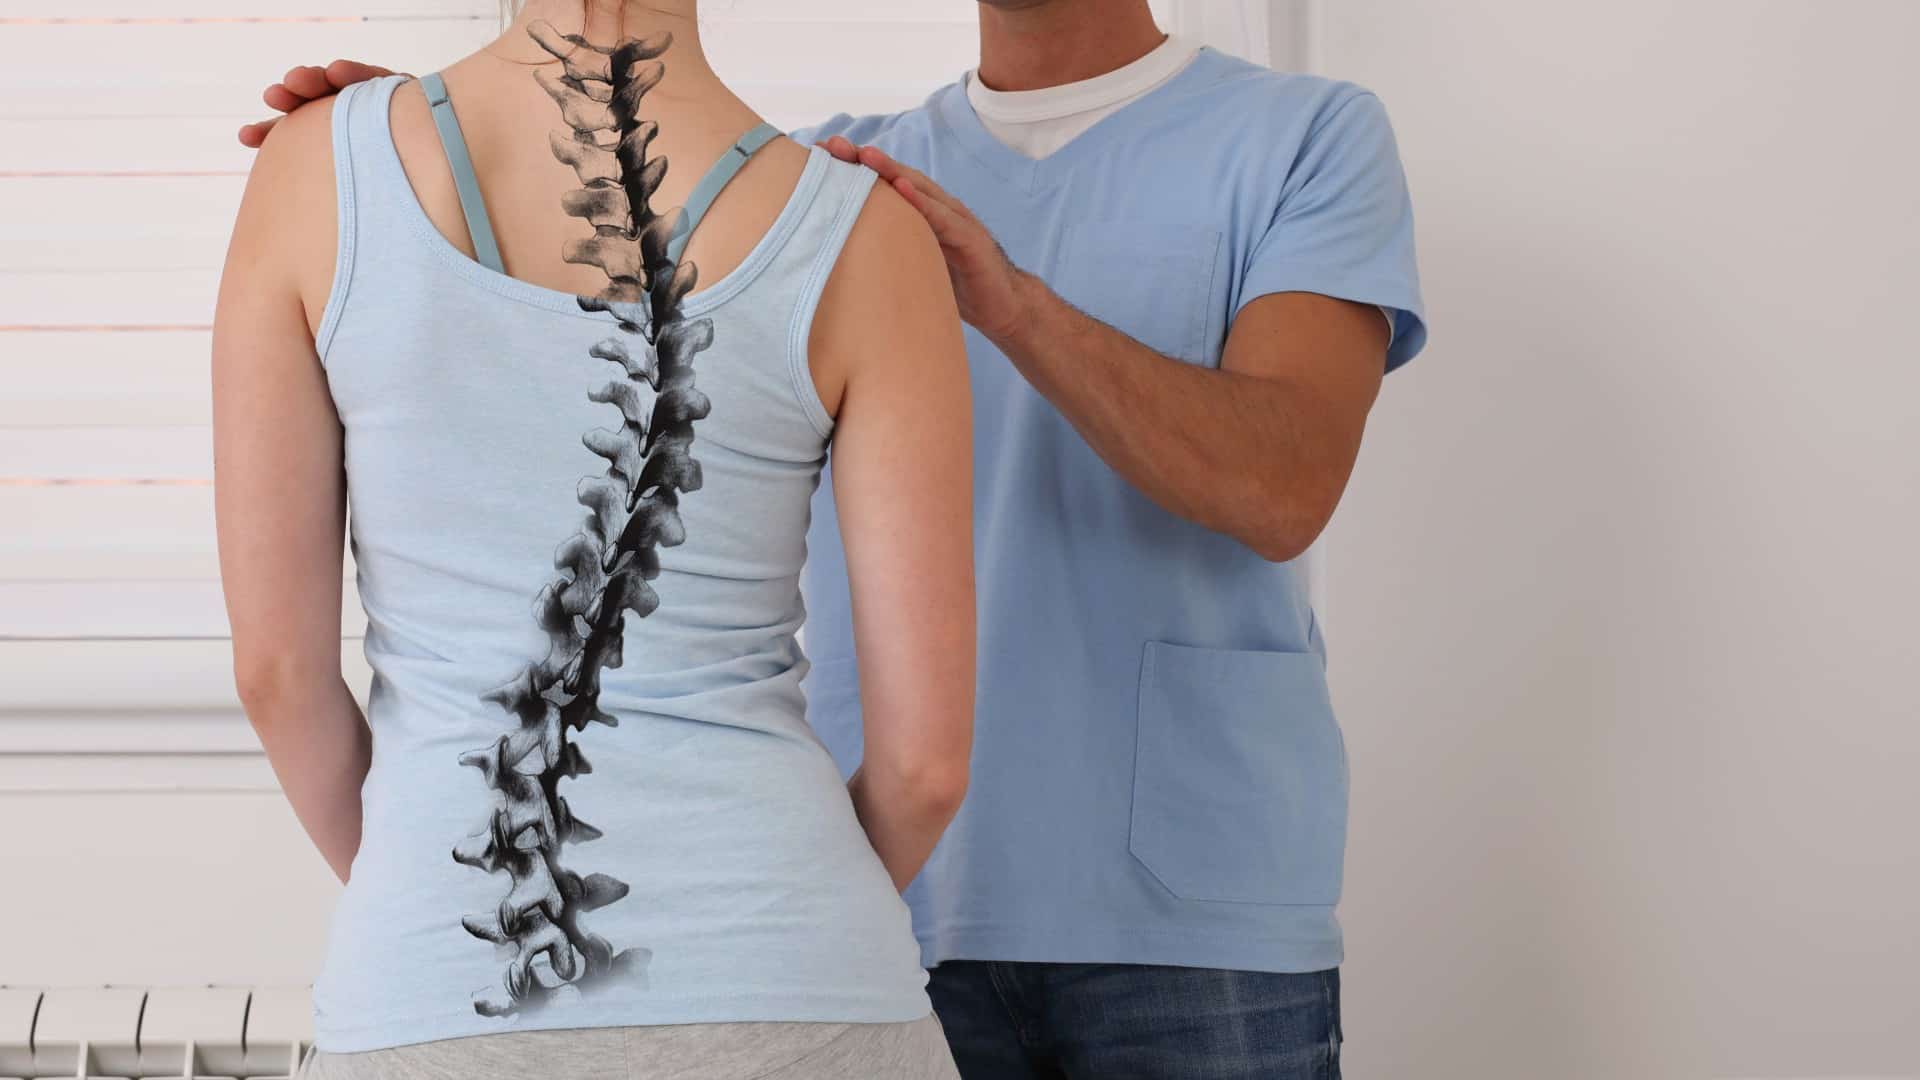 a person’s spine